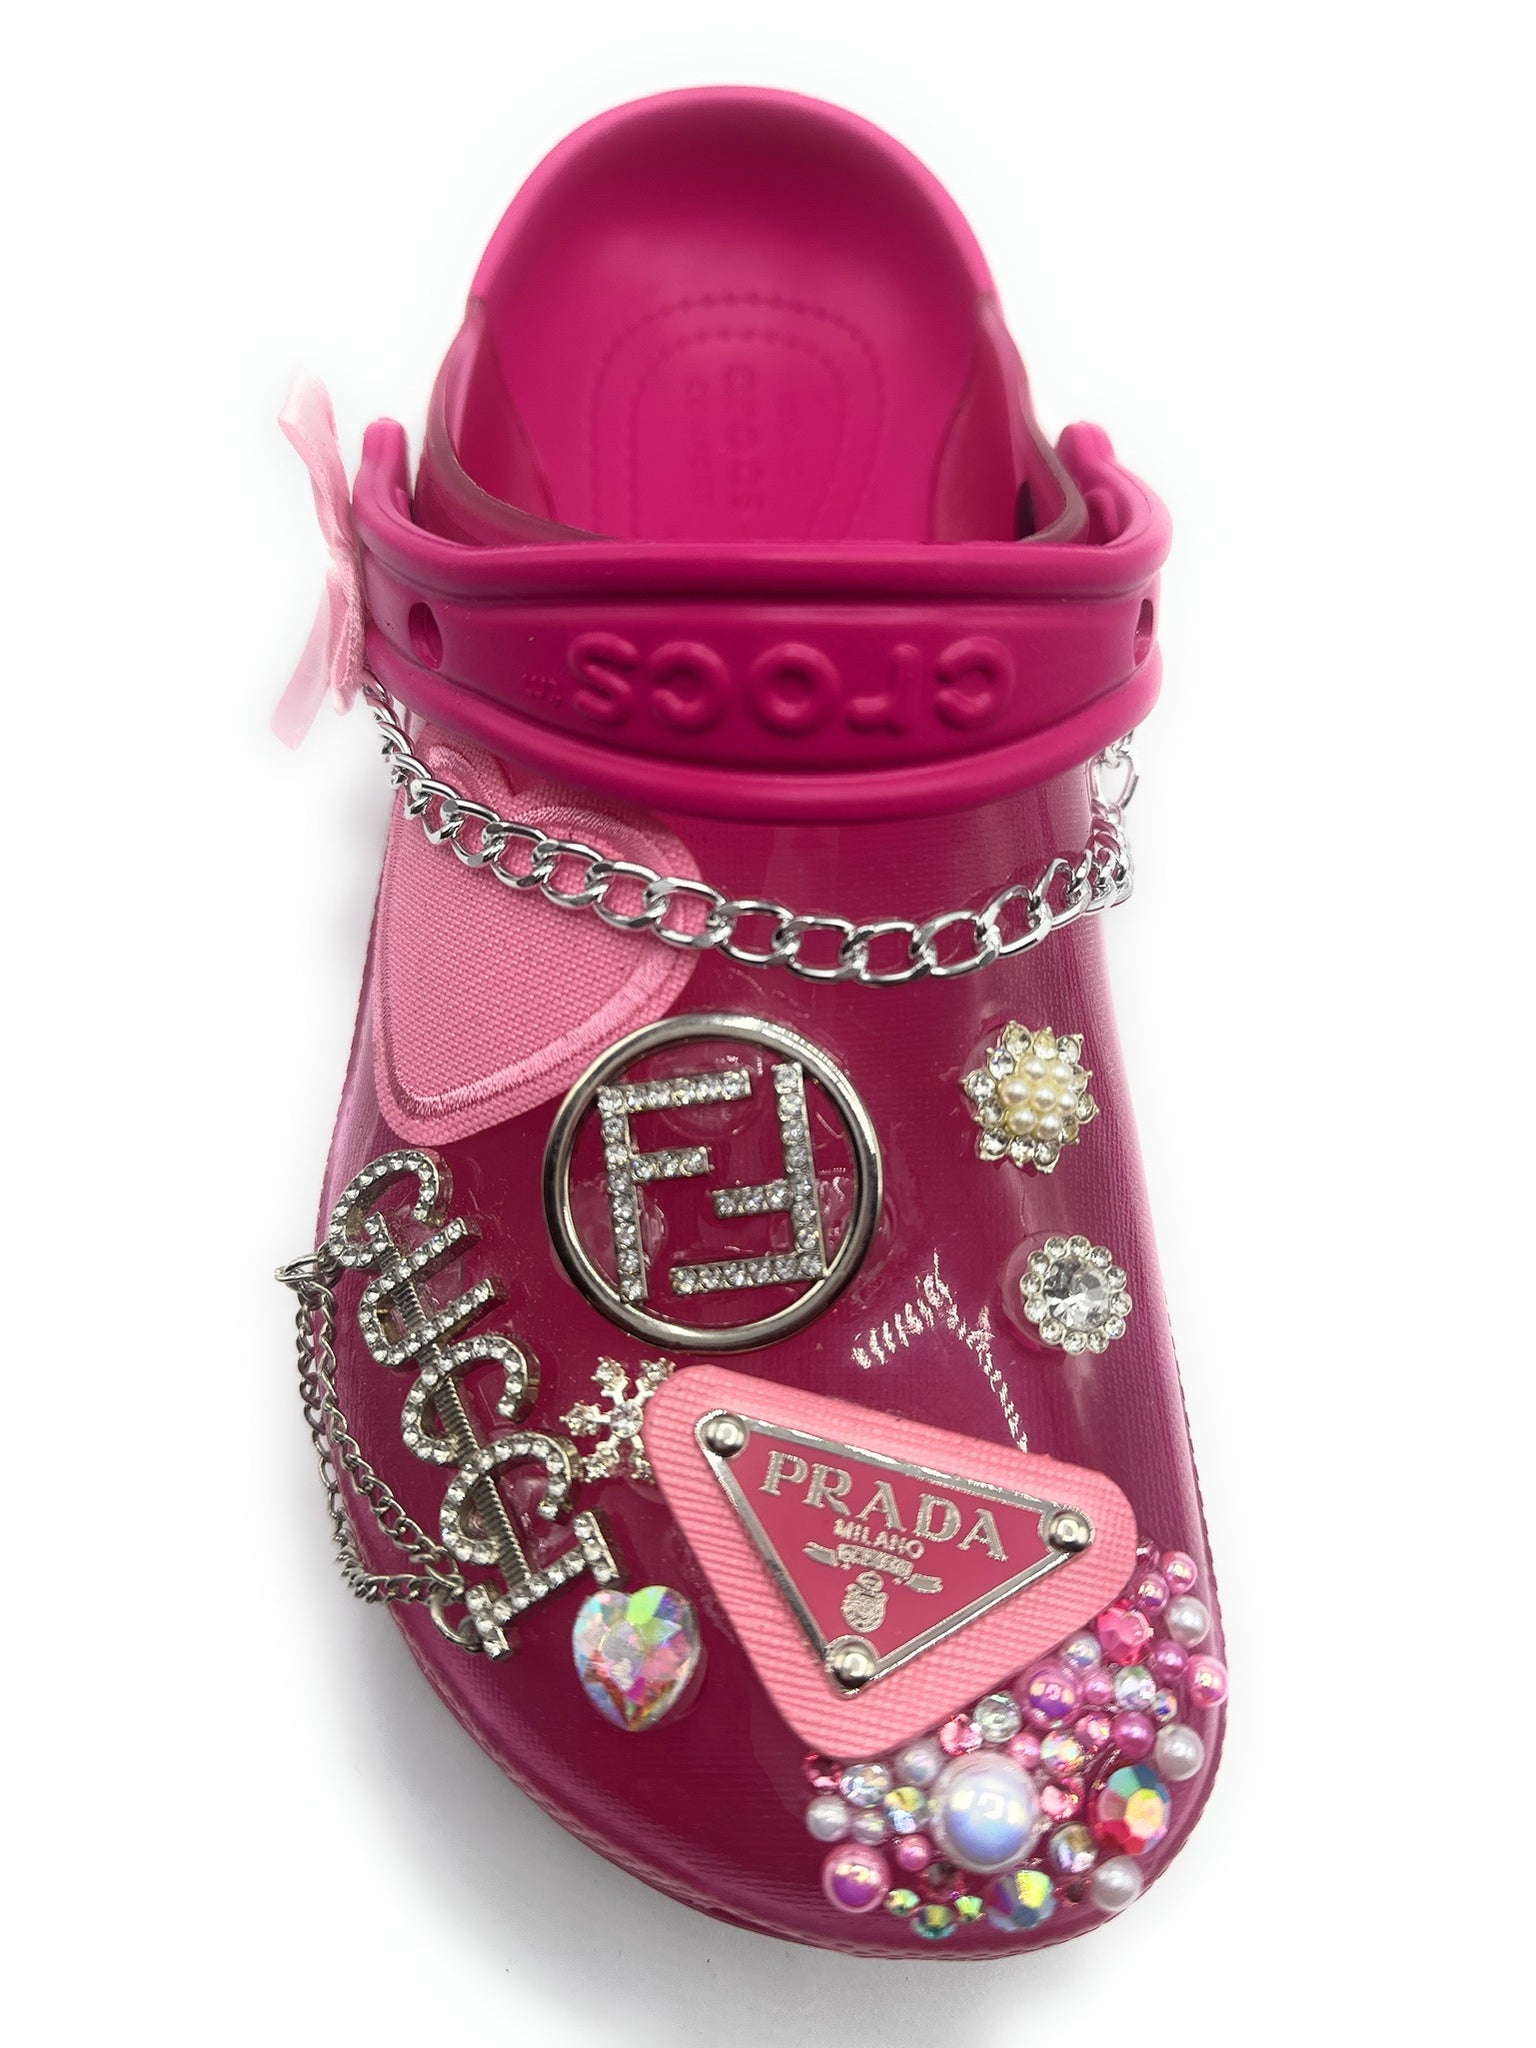 HOT PINK TRANSLUCENT CROCS WITH DESIGNER CHARMS – PinkIce Novelty